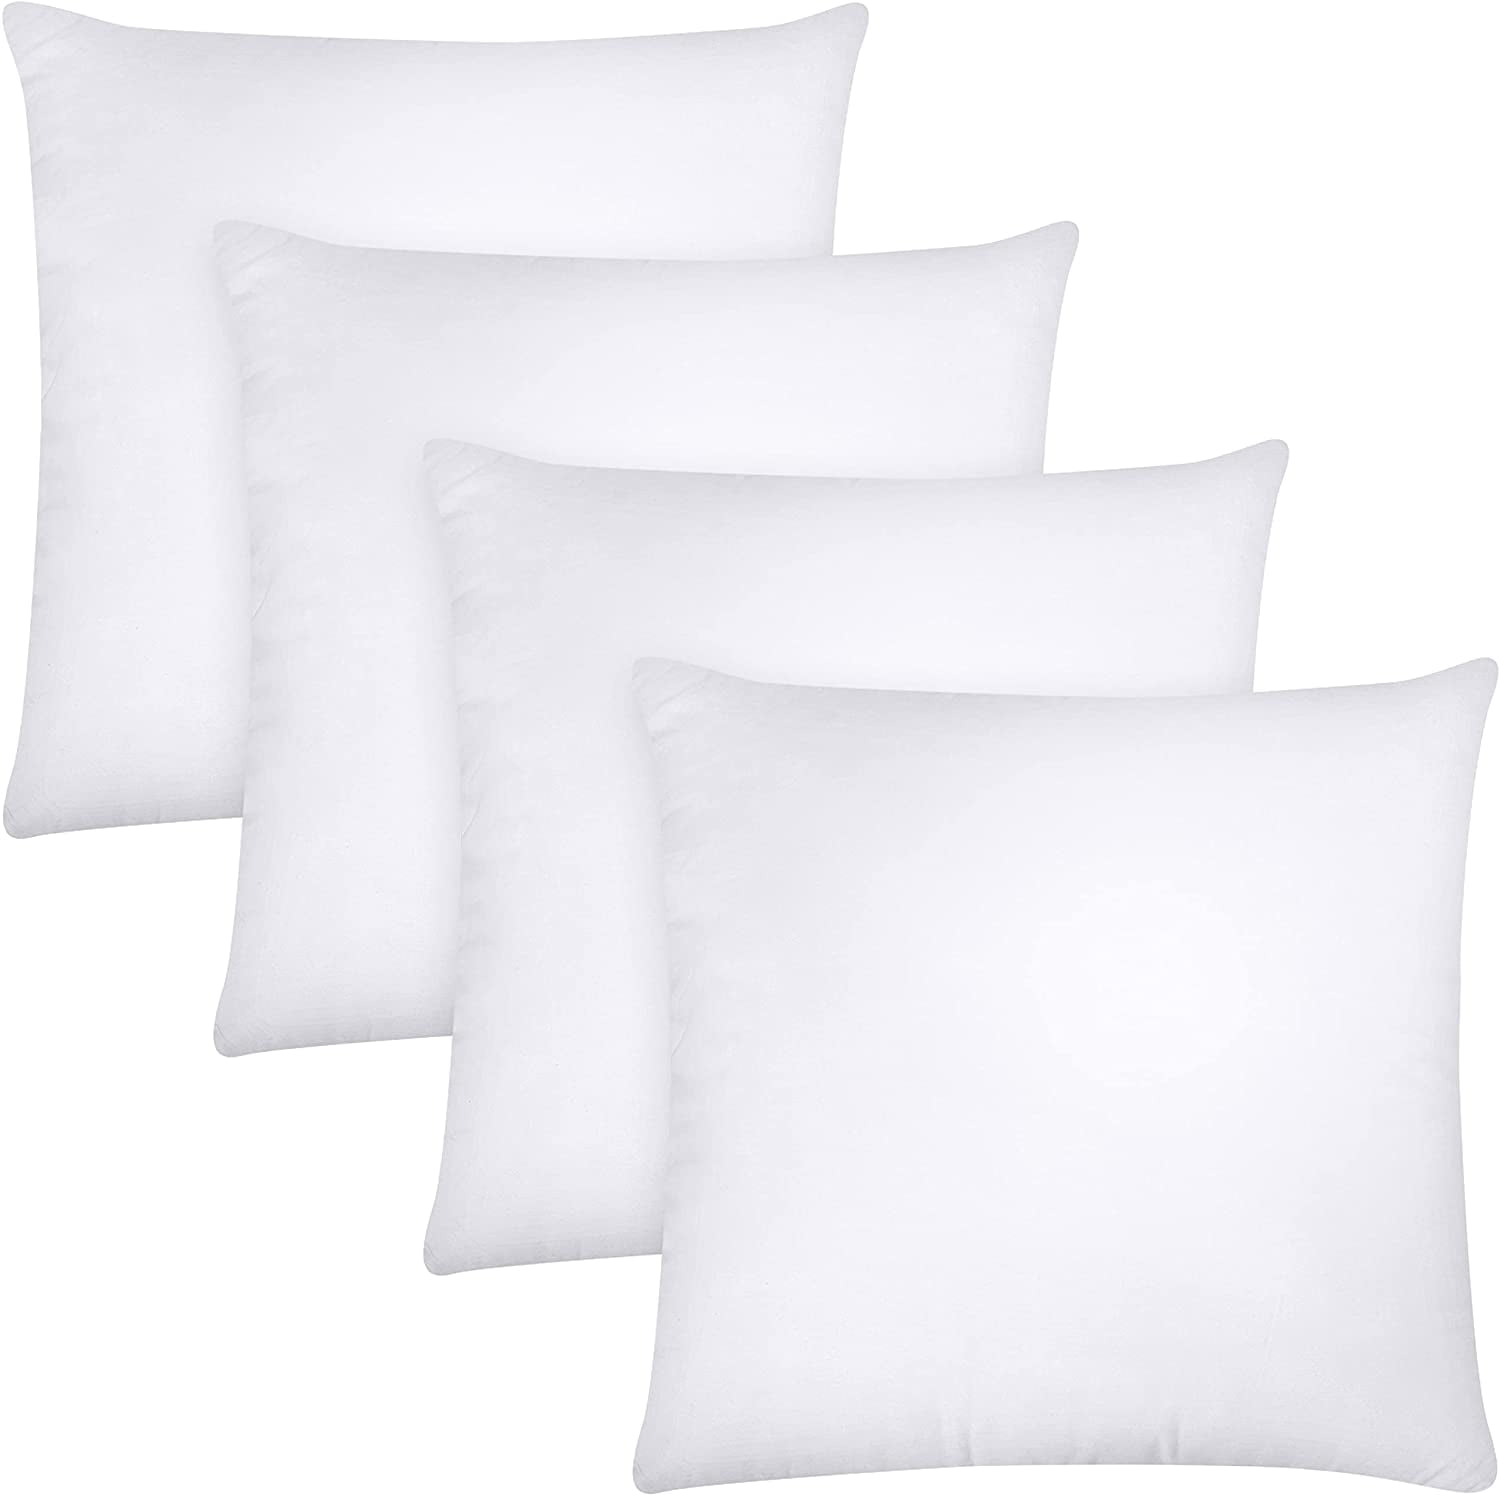 20 inch Square Bright Pillows by Environments - Set of 6, Washable Throw  Pillows, Create Soft and Cozy Areas in Preschools, Classrooms, Daycares and